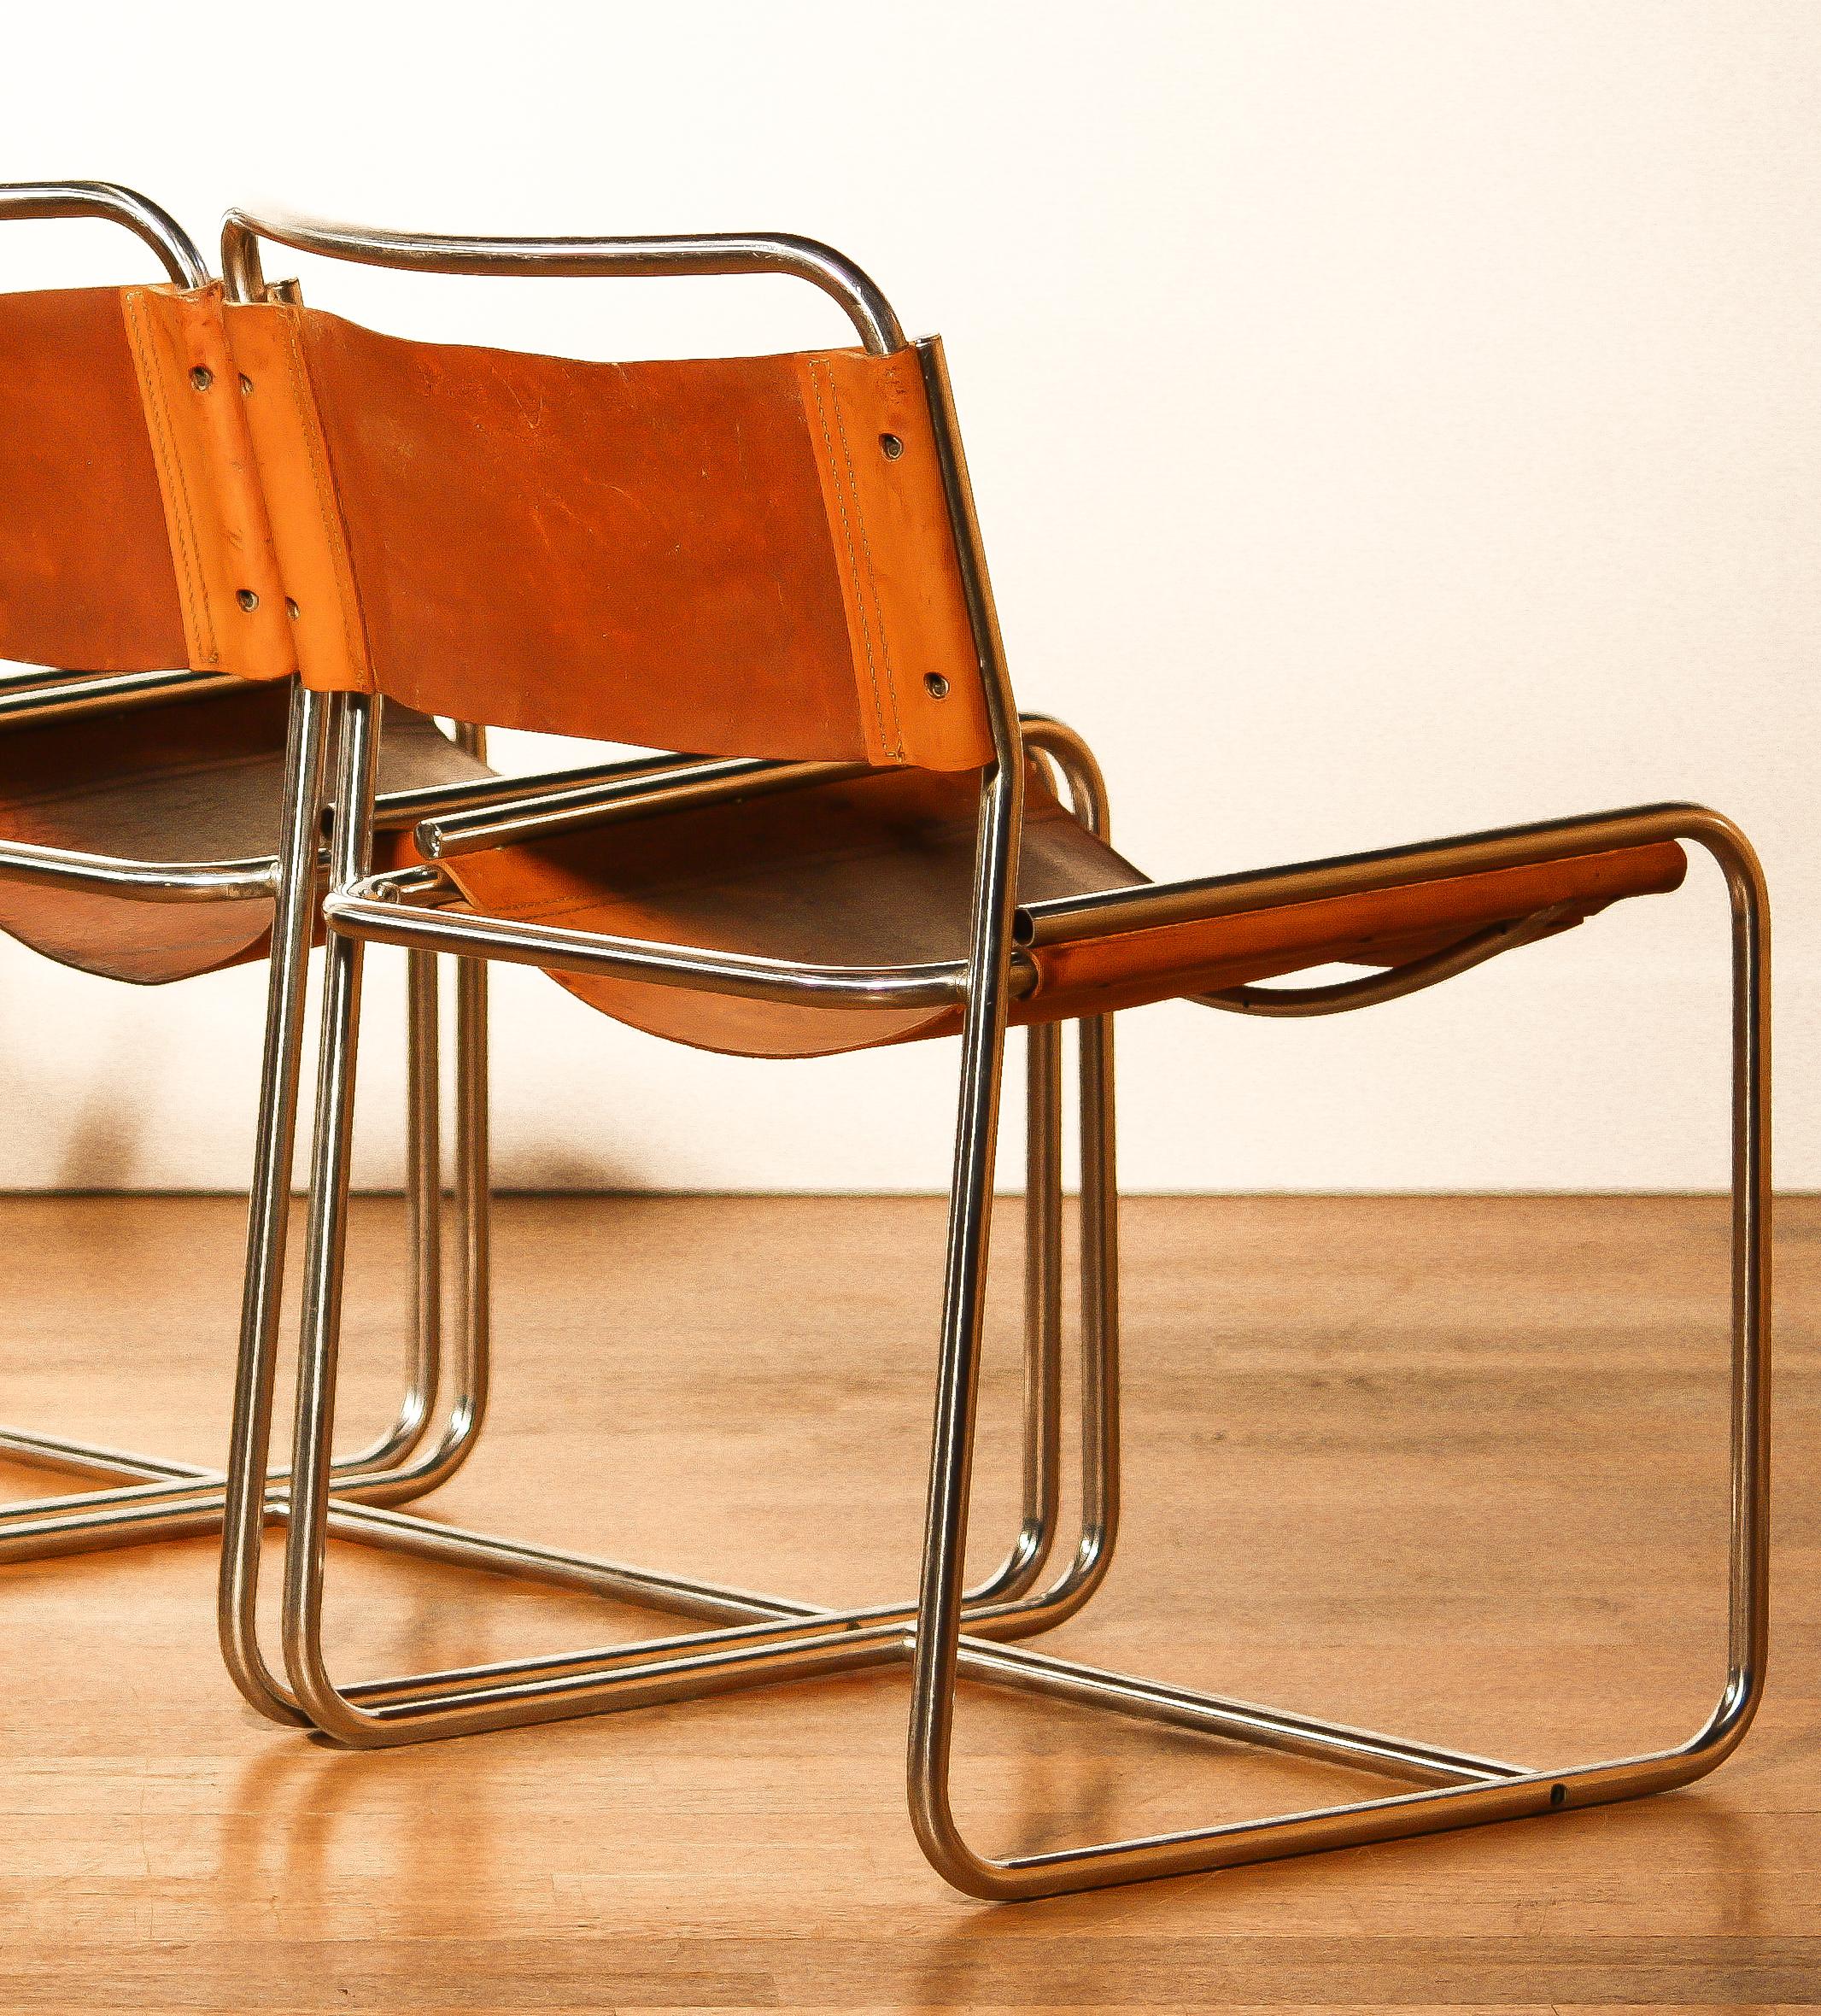 Steel / Leather Set Dining Chairs by Paul Ibens & Clair Bataille for 't Spectrum 2